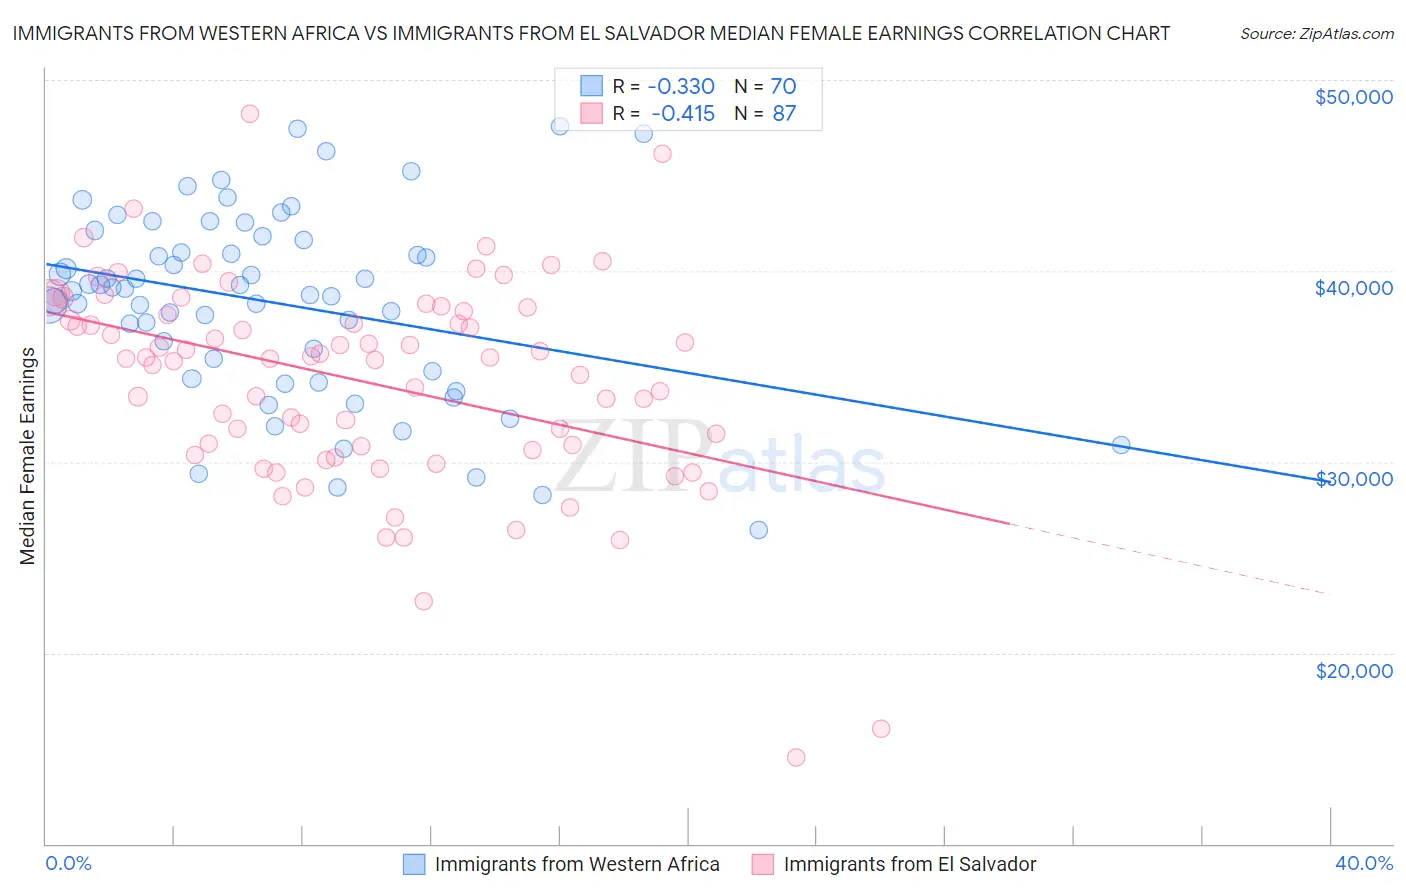 Immigrants from Western Africa vs Immigrants from El Salvador Median Female Earnings